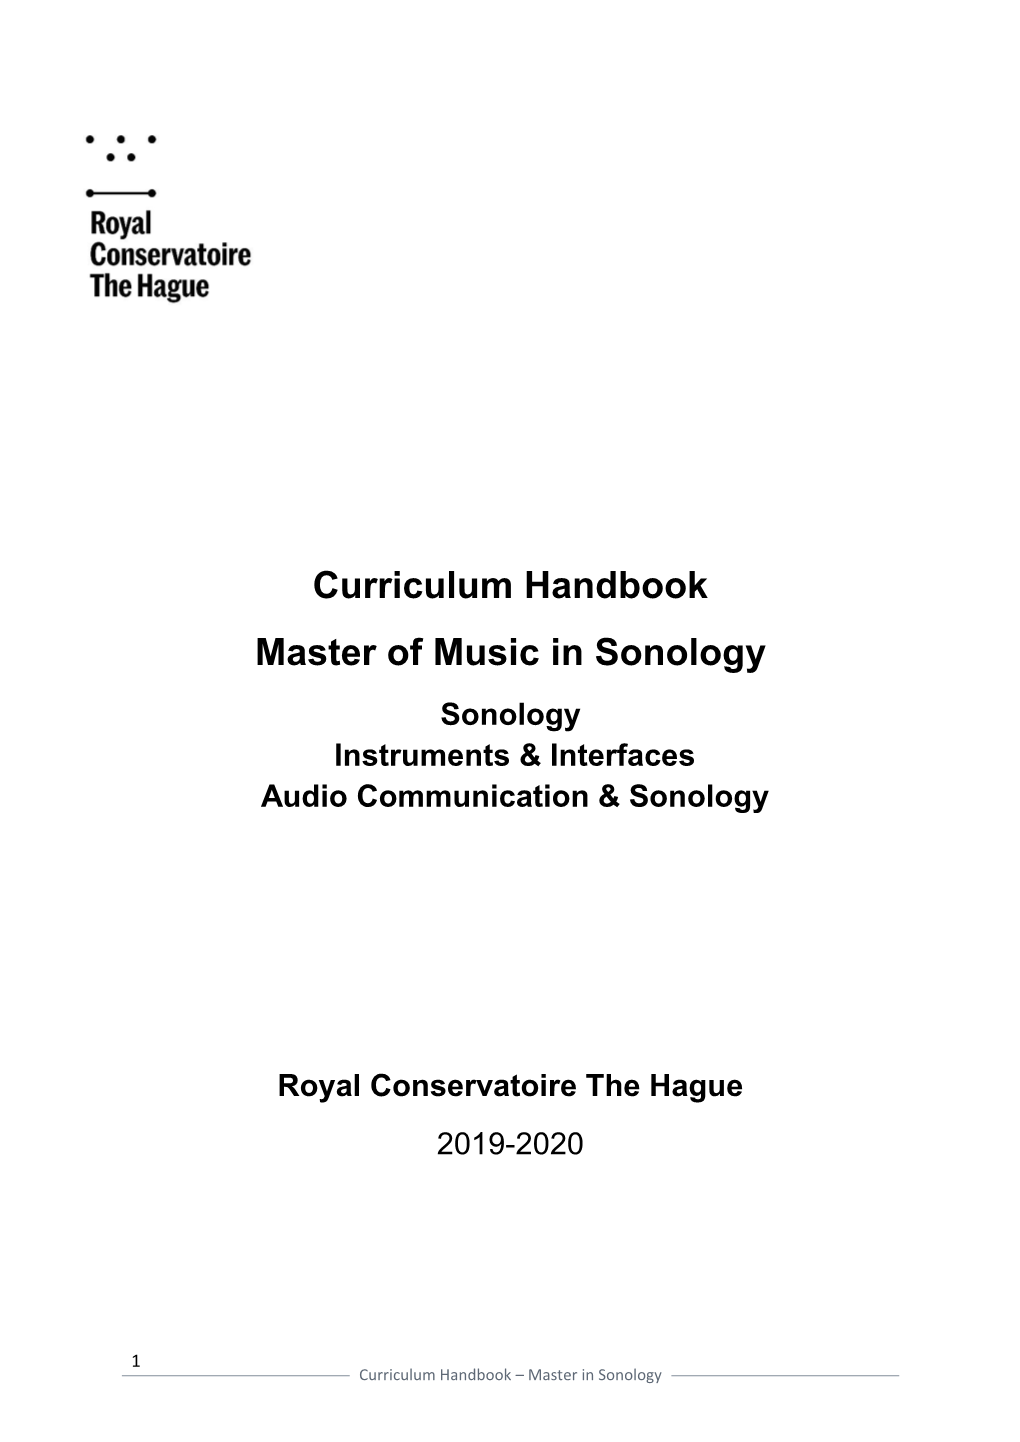 Curriculum Handbook Master of Music in Sonology Sonology Instruments & Interfaces Audio Communication & Sonology